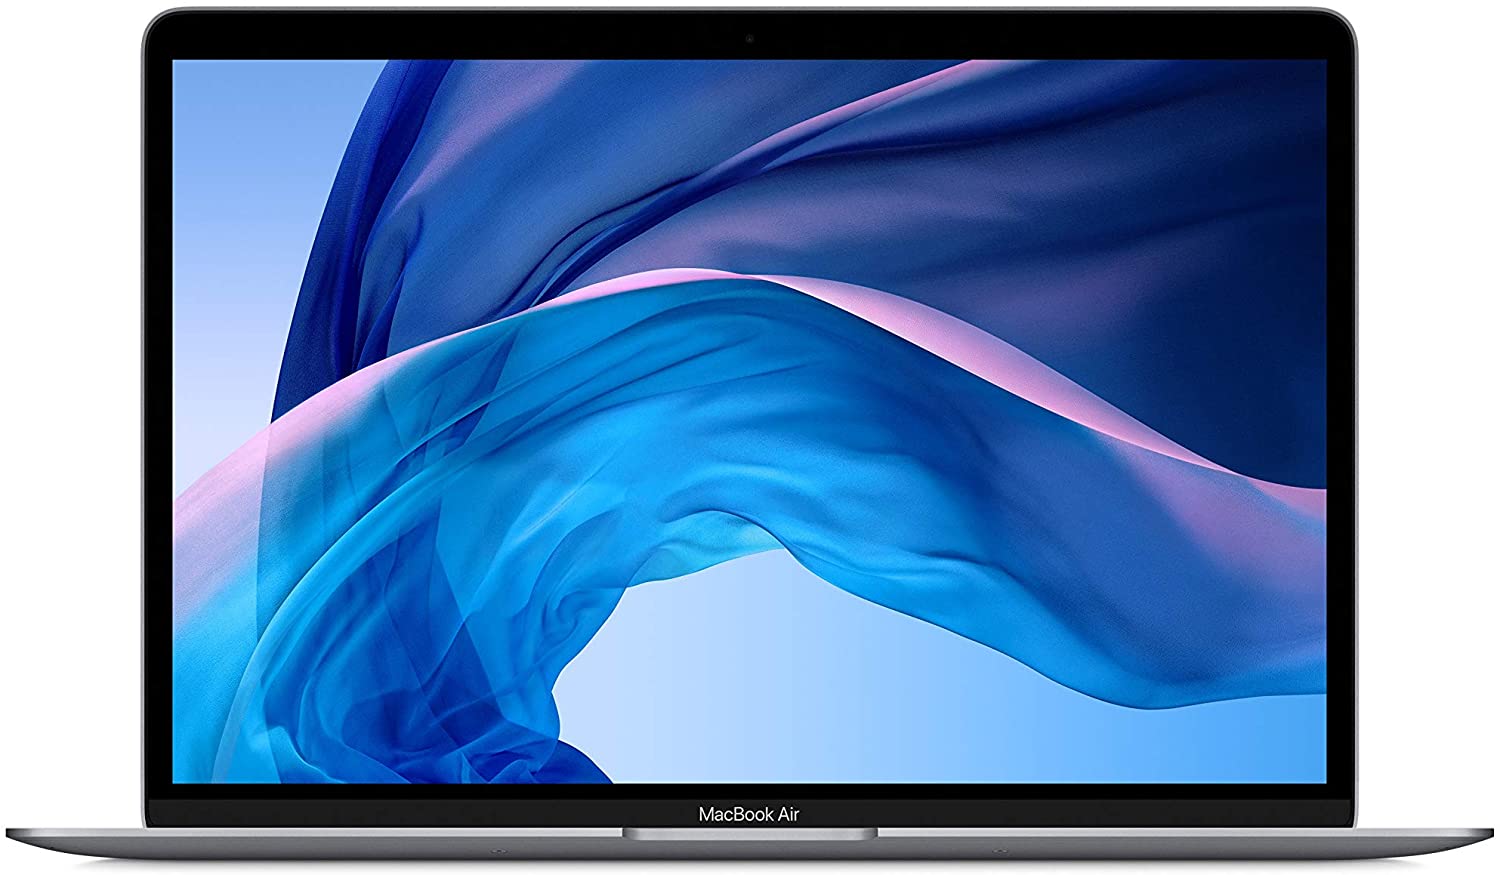 Mac Book Air(Best Laptops For MBA Students):